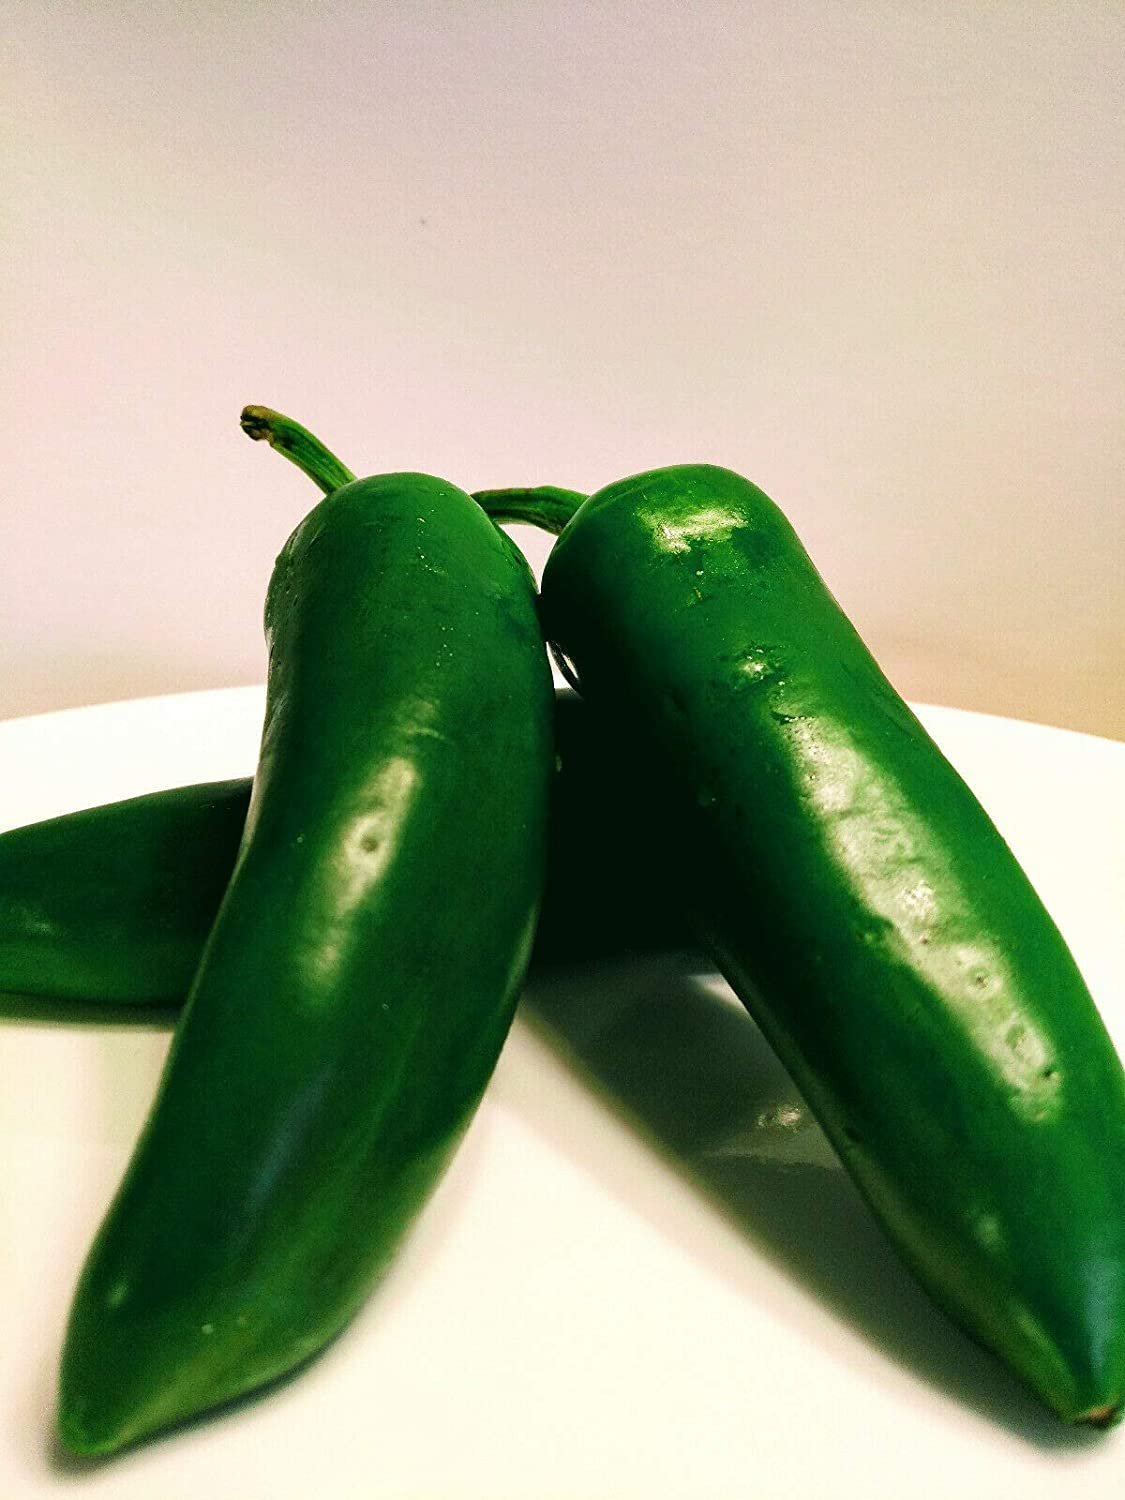 Early Jalapeno Hot Pepper 50 Vegetable Seeds - Capsicum annuum, Mexican Chili Pepper for Salsa